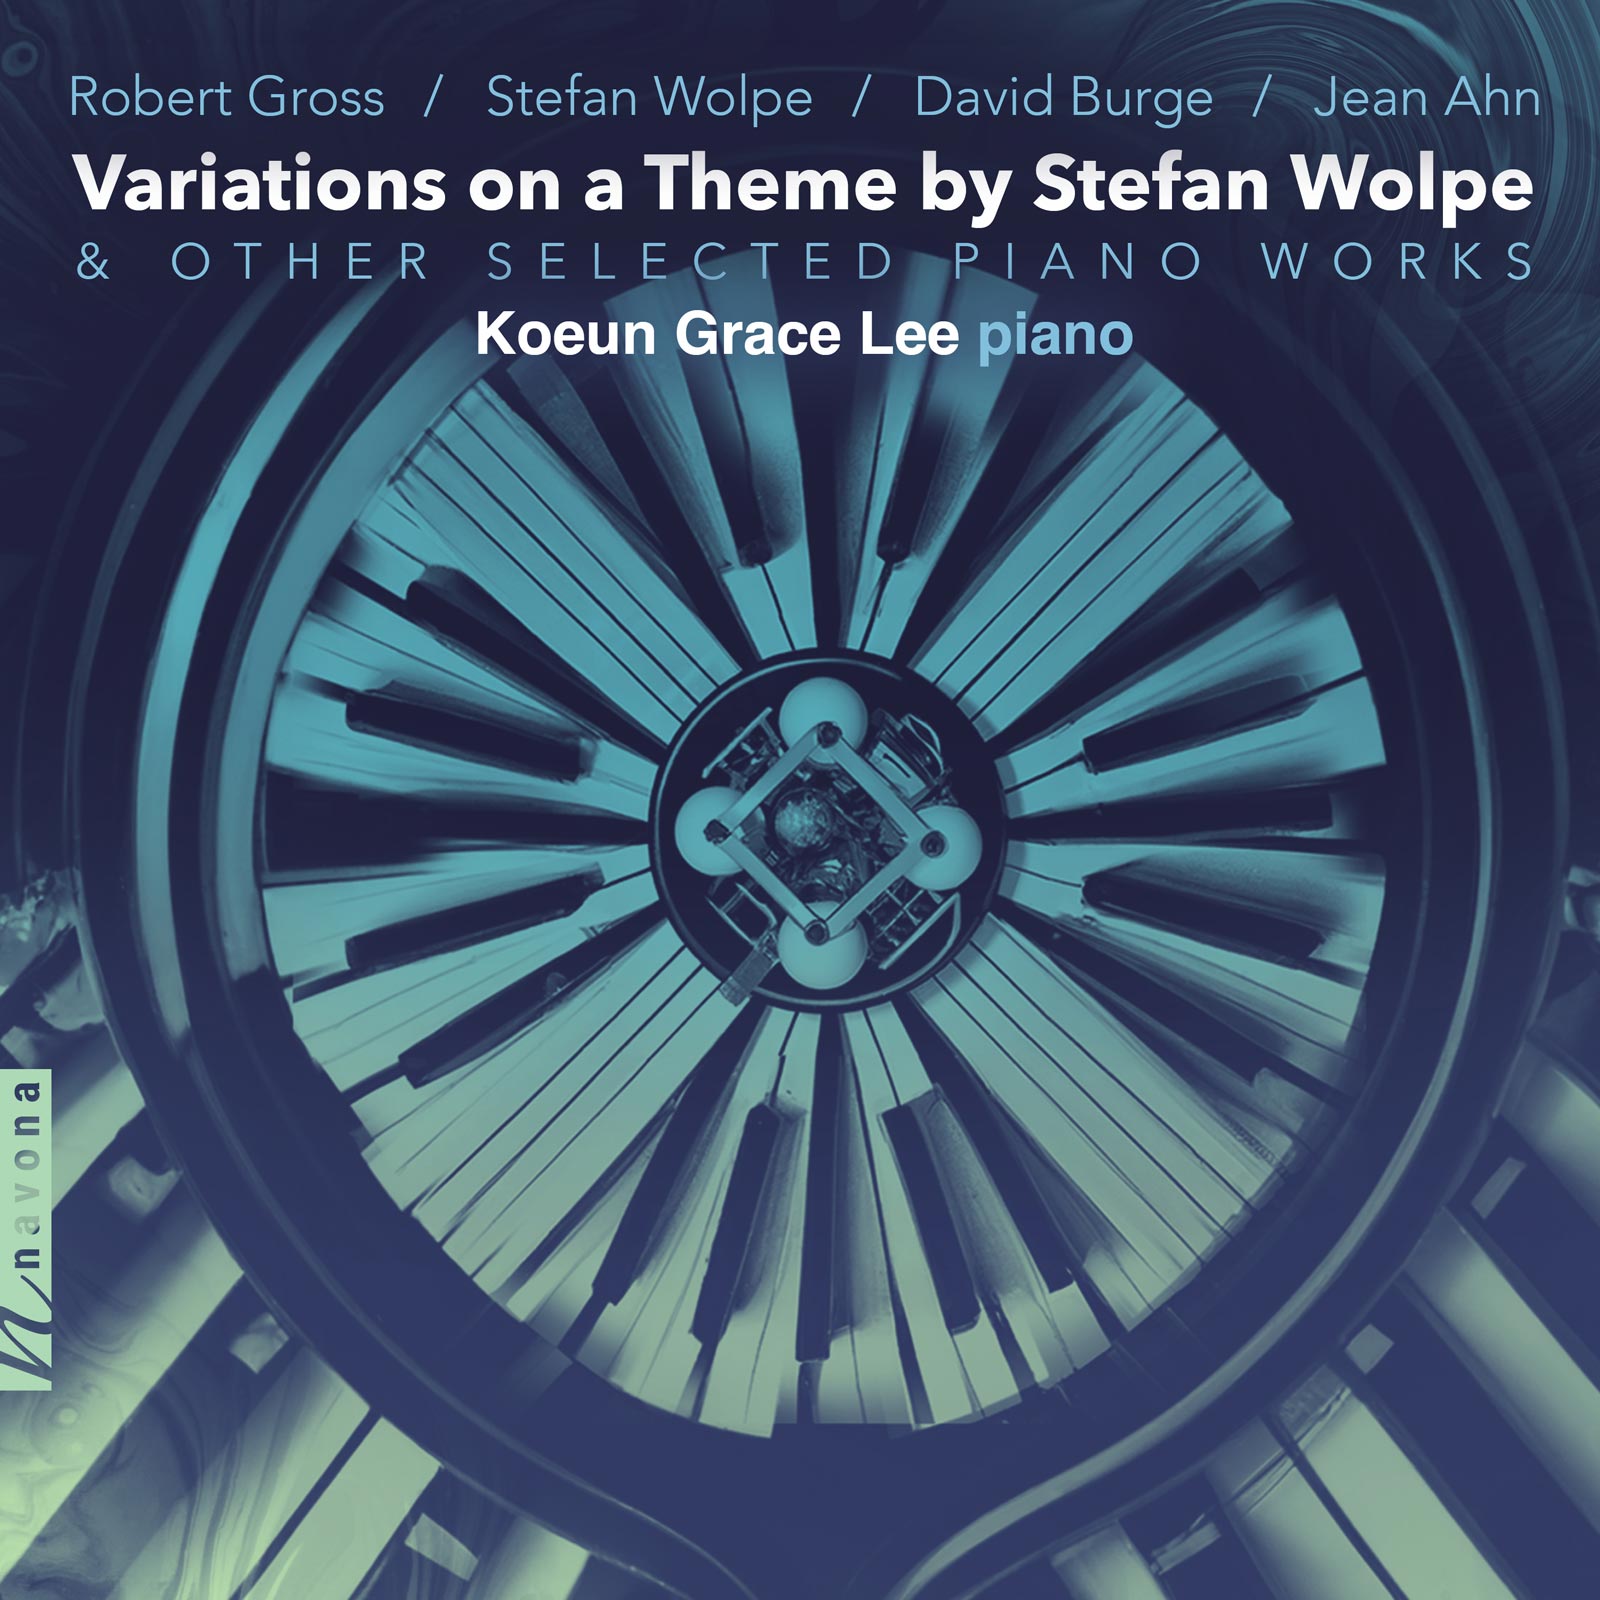 Variations on a Theme by Stefan Wolpe